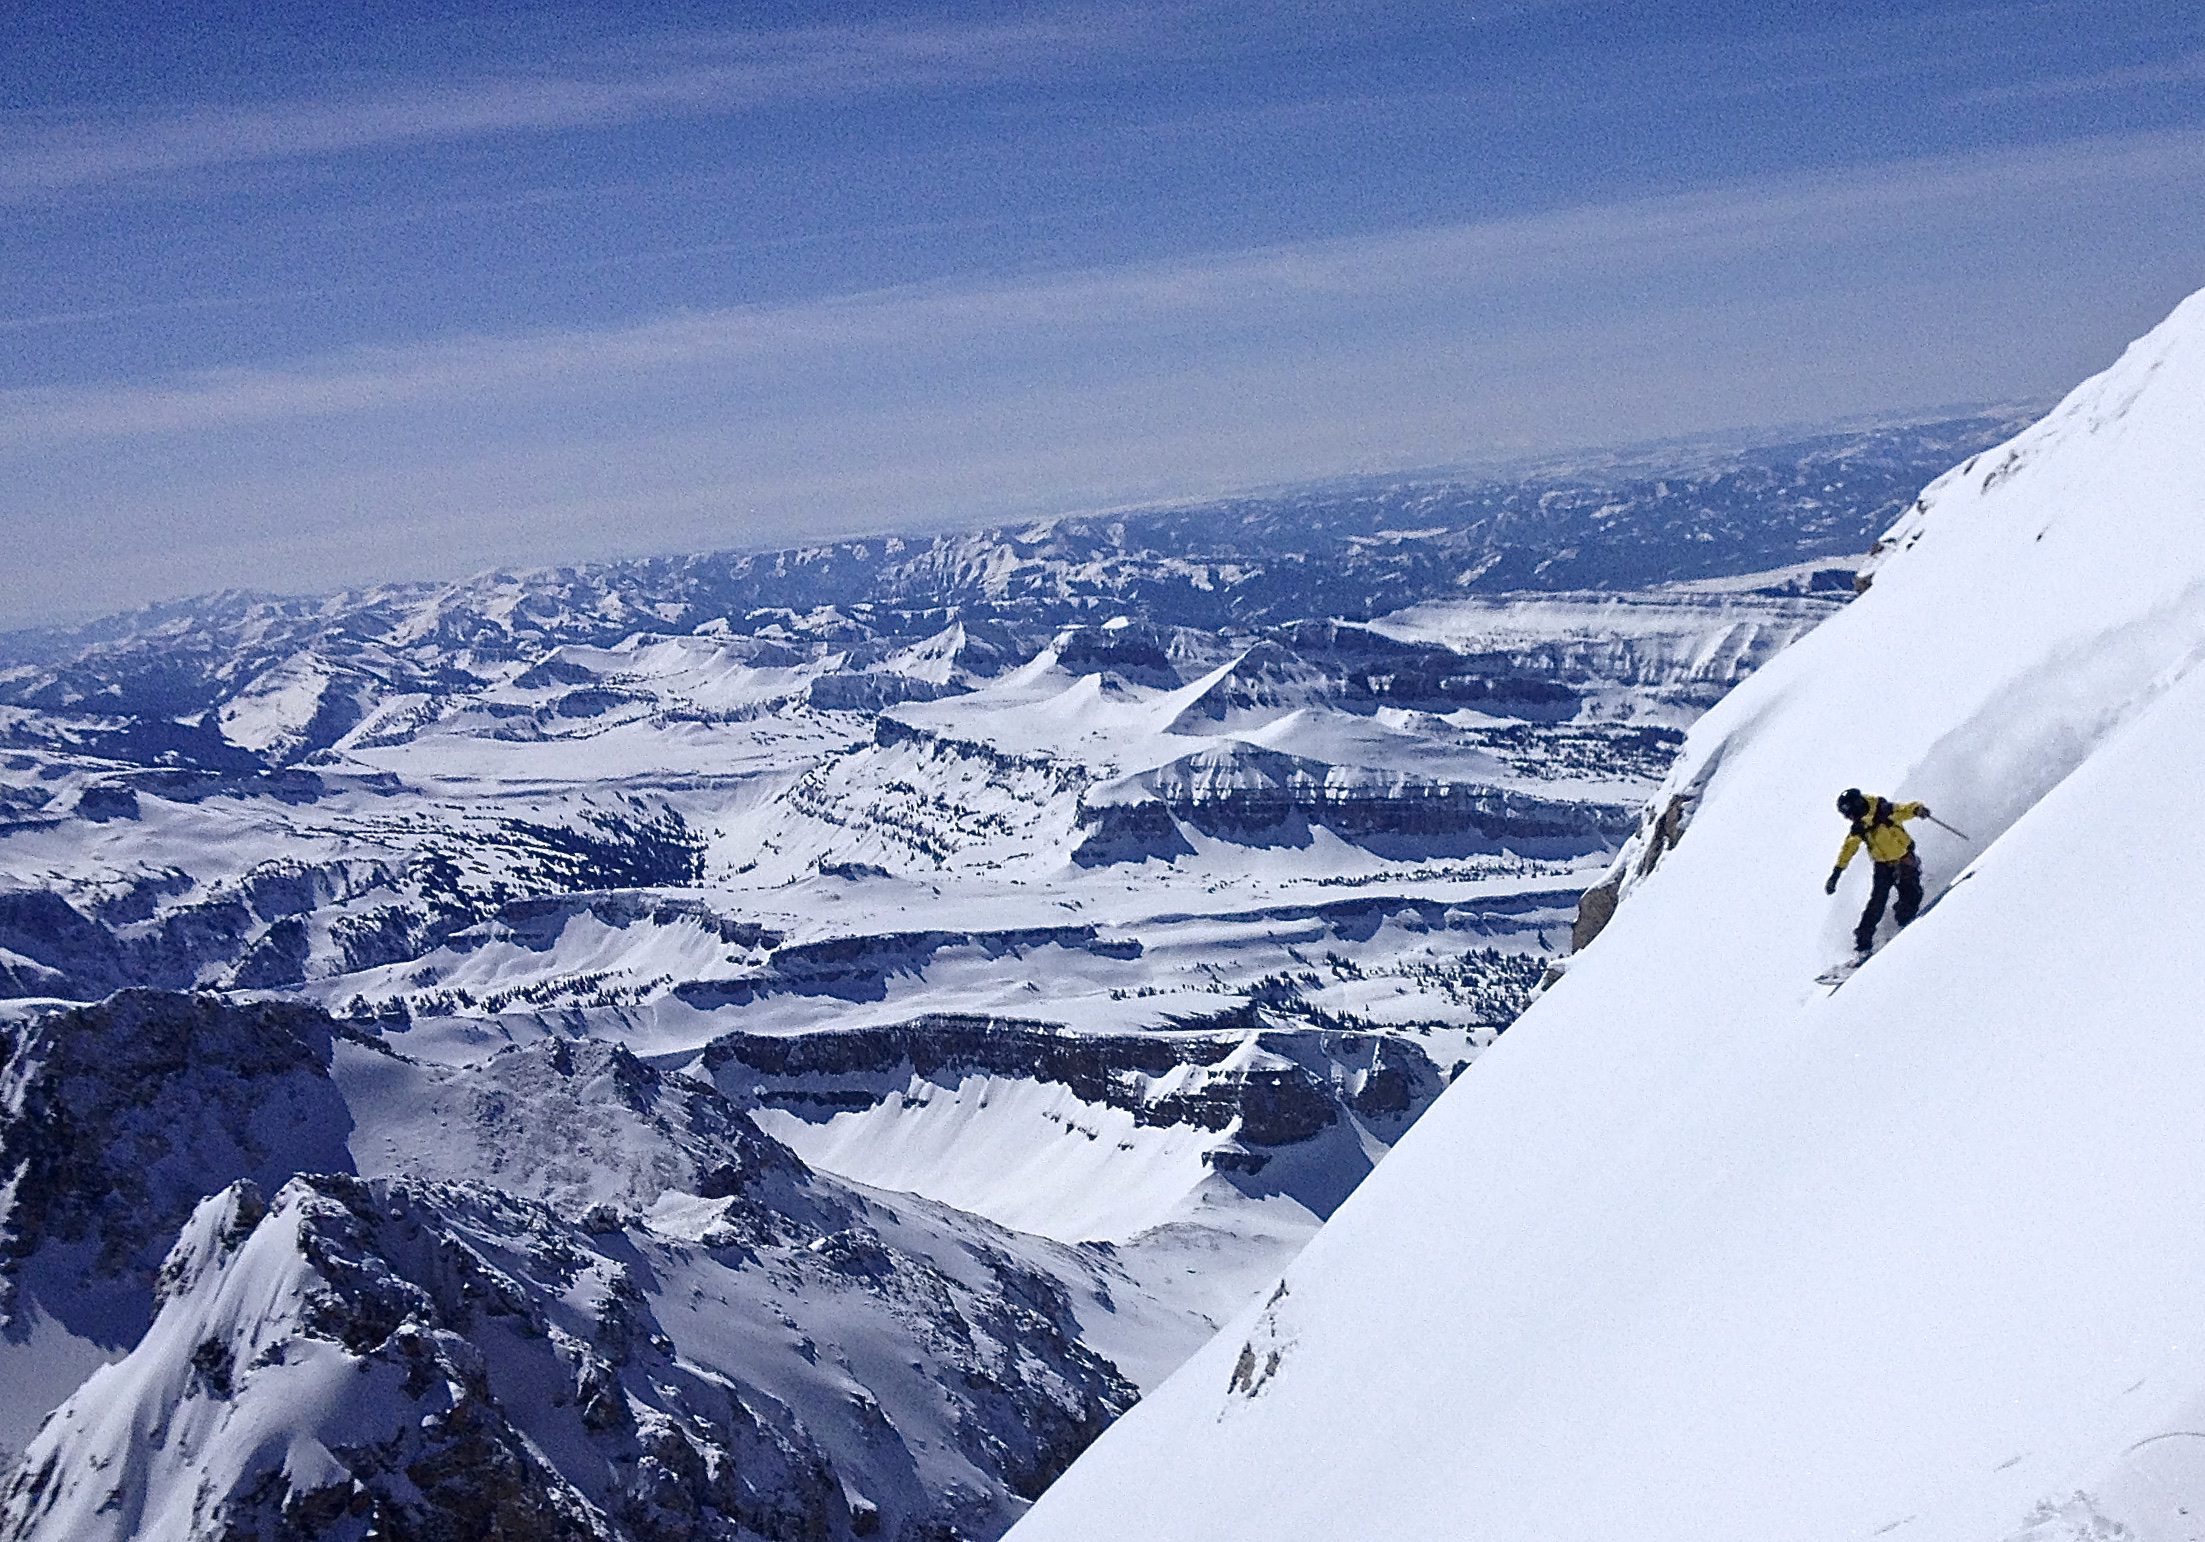 A skier descending a steep snowy mountain demonstrating the five resolutions of the lifelong athlete.